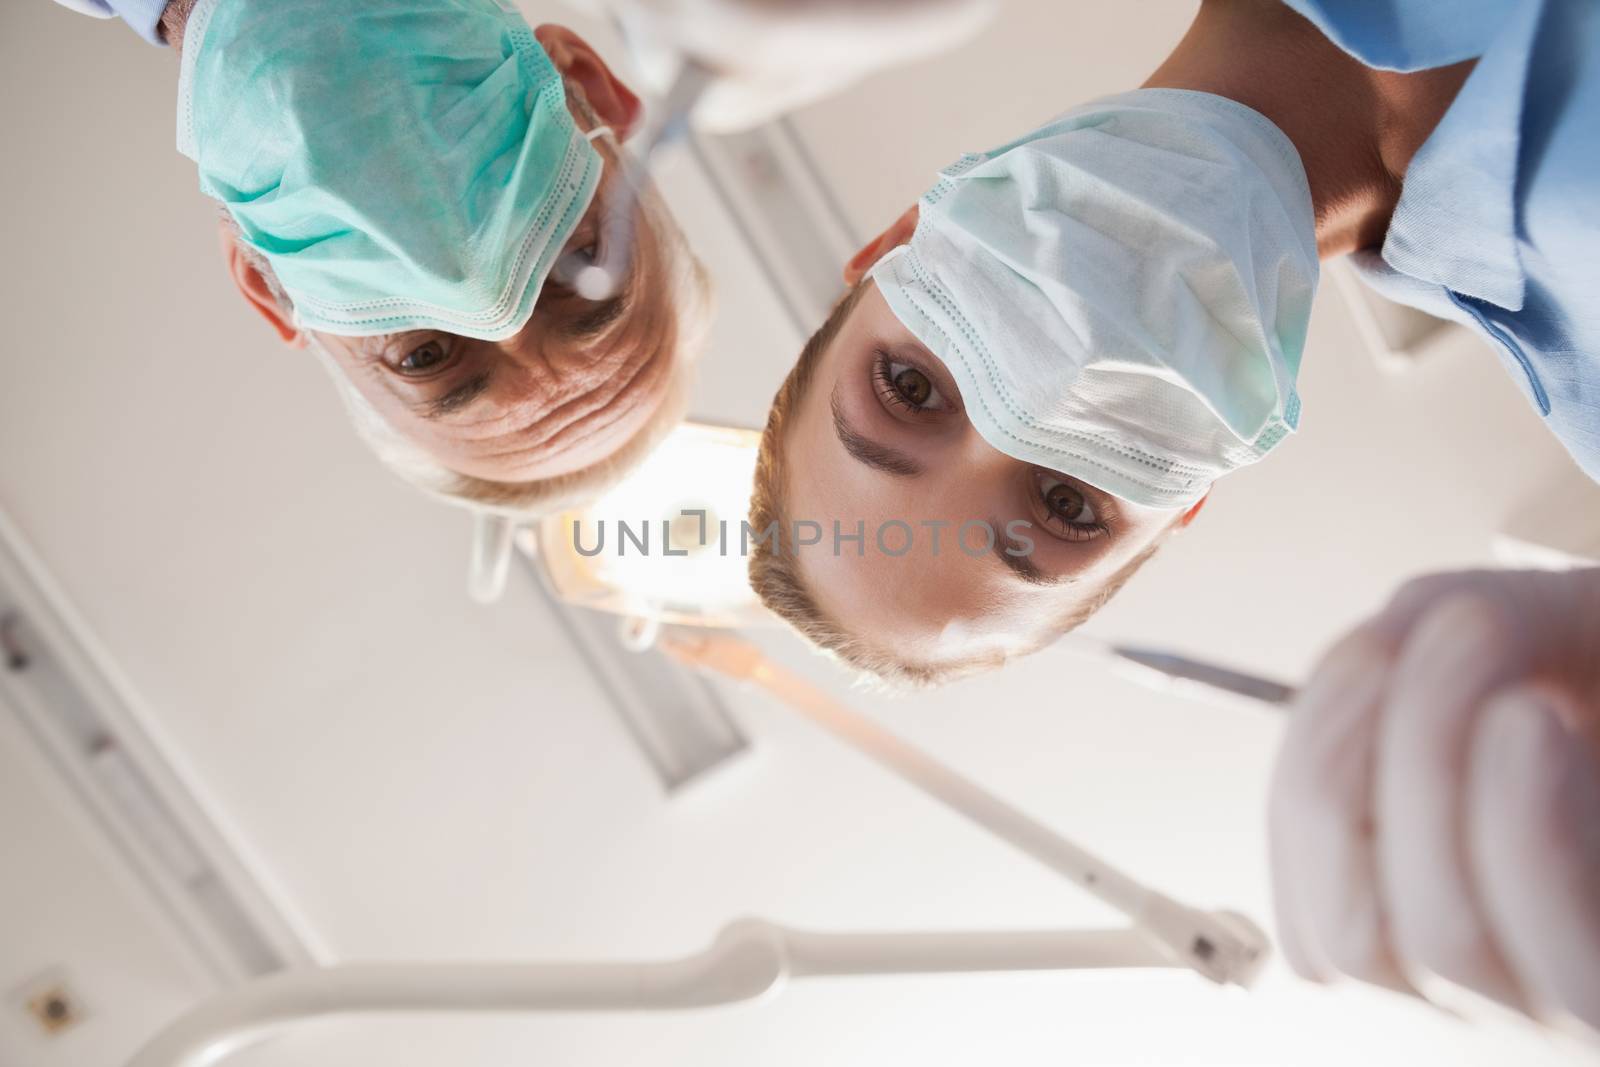 Dentist and assistant leaning over patient by Wavebreakmedia